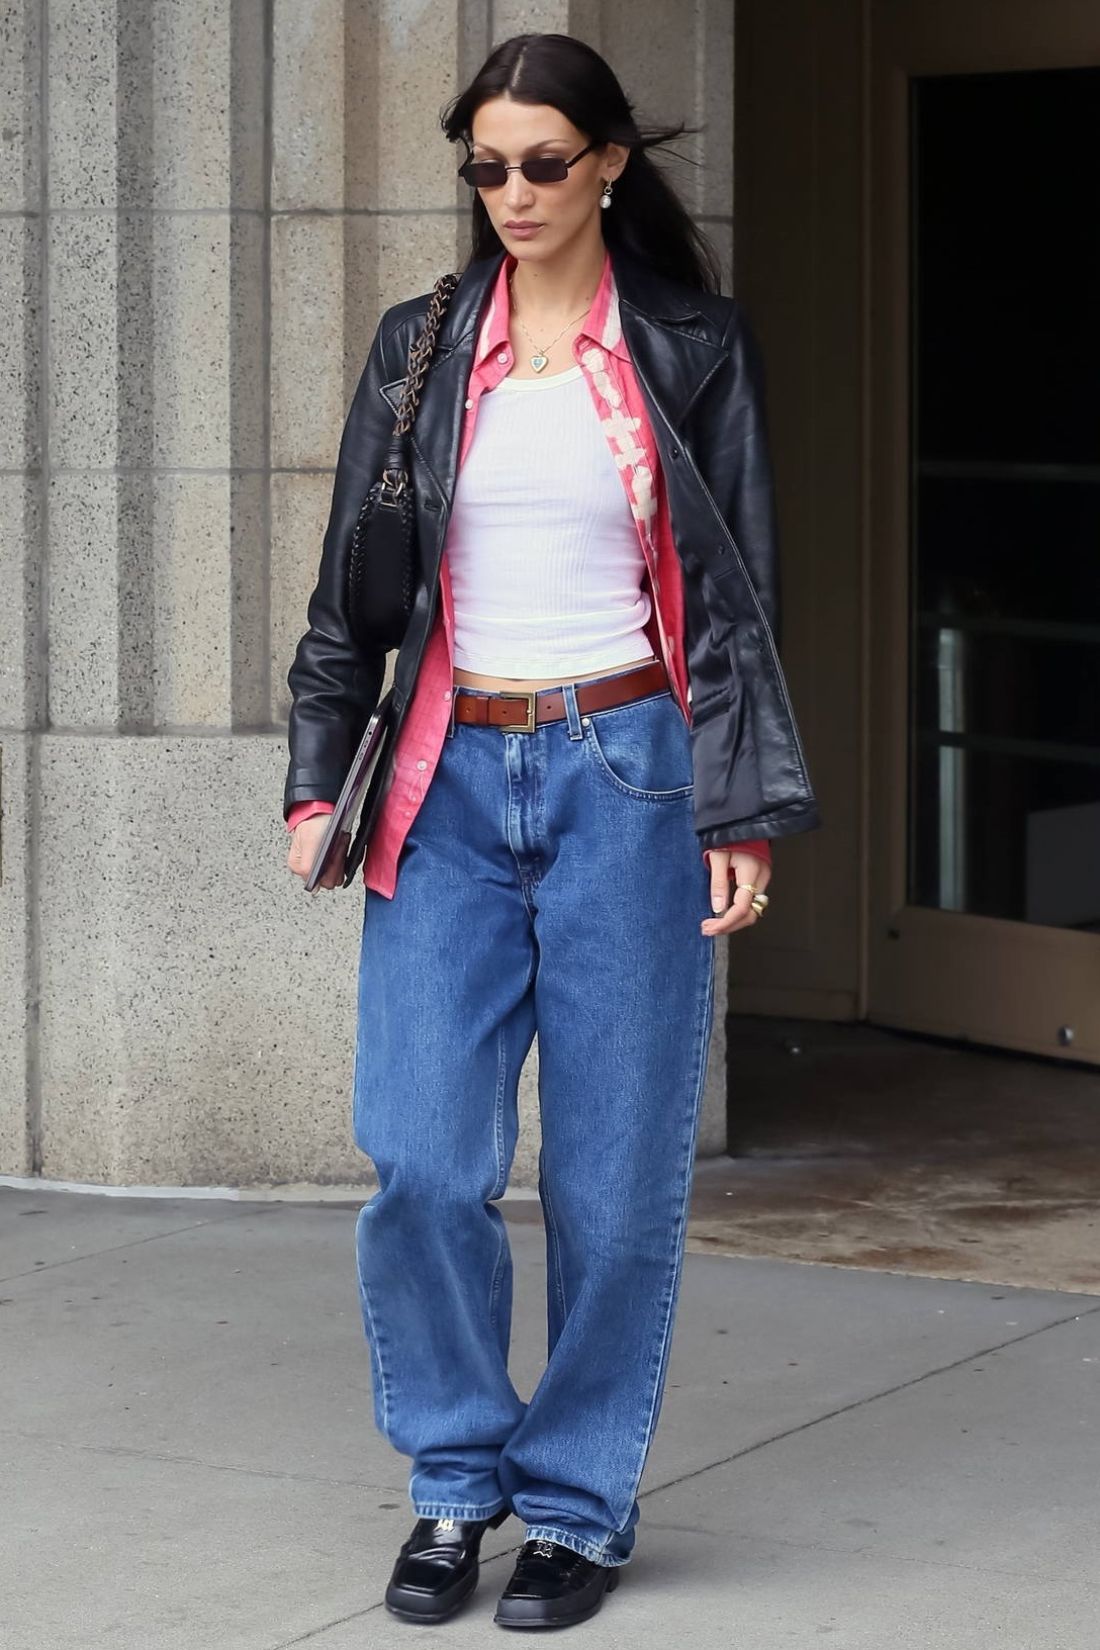 Bella Hadid in Vintage Leather Jacket, White Tank Top, Oversized Blue Jeans, Loafers 90s-Inspired Outfit